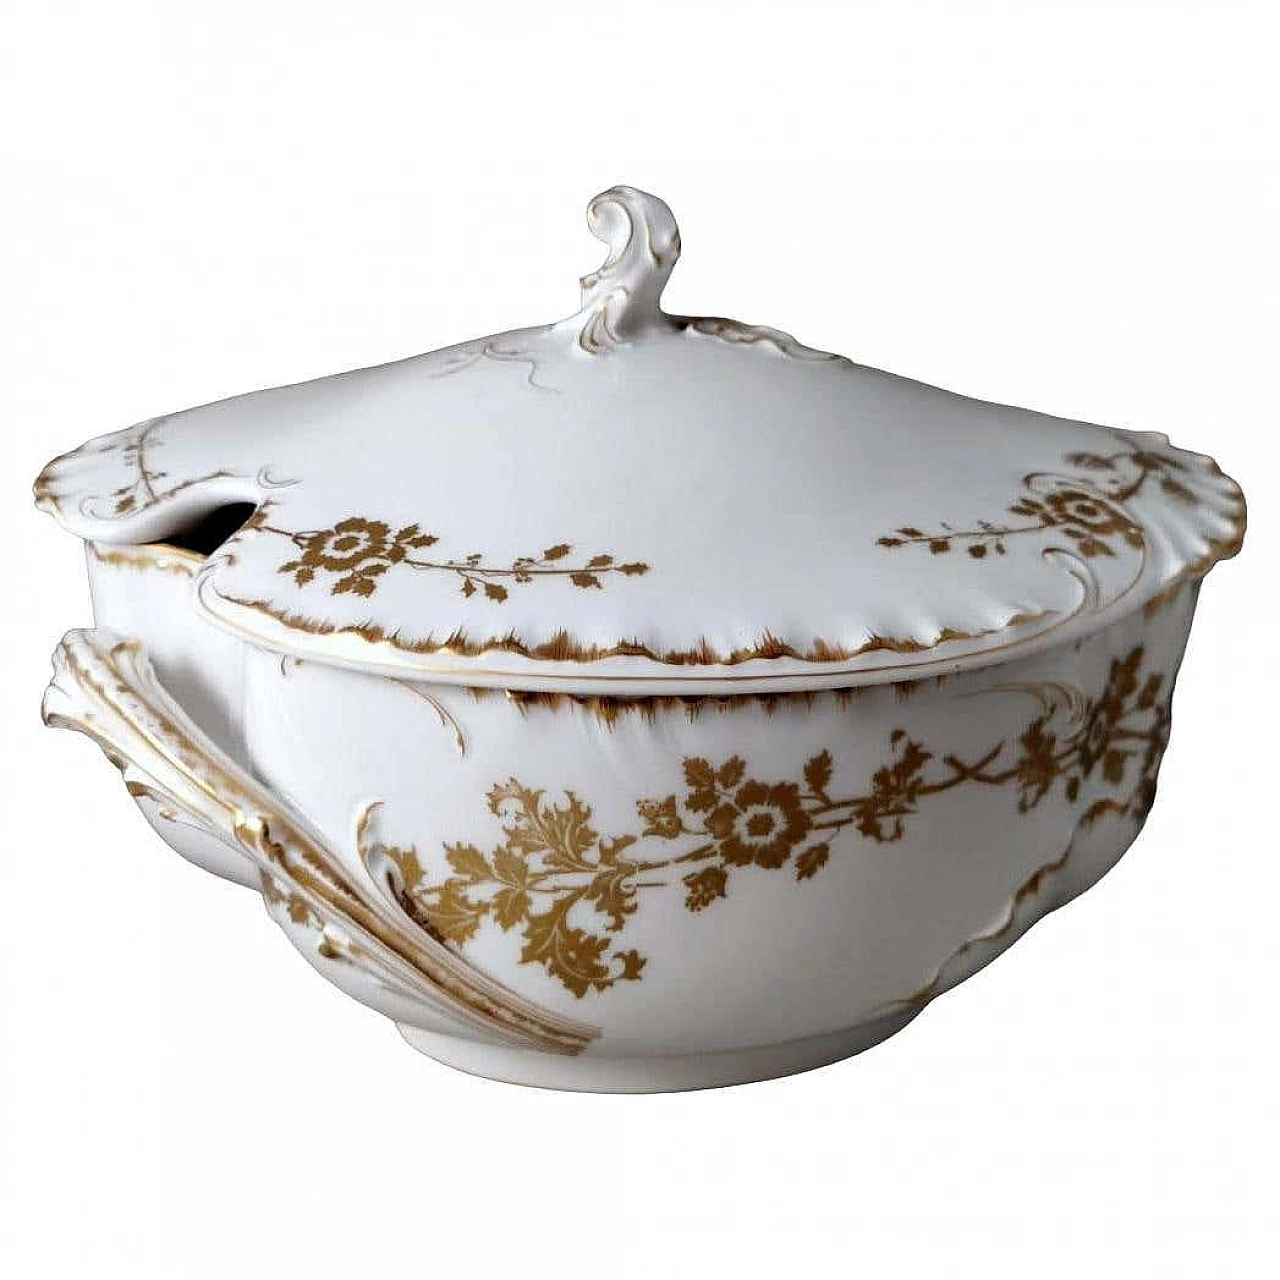 White porcelain tureen with gilt decoration by Haviland & Co Limoges, early 20th century 19